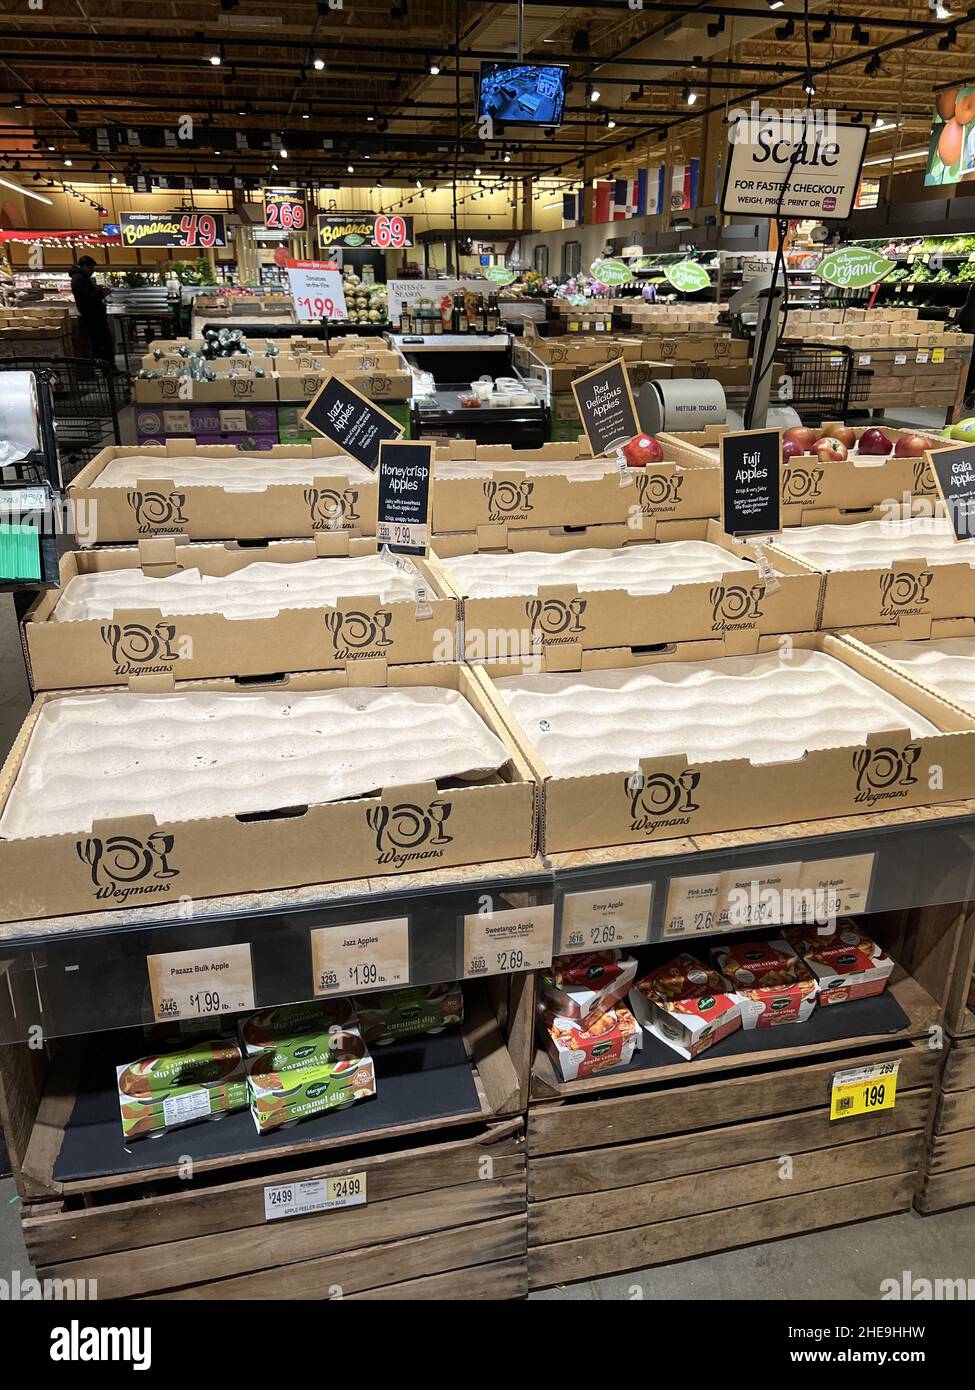 Las Vegas grocery stores see empty shelves during omicron wave